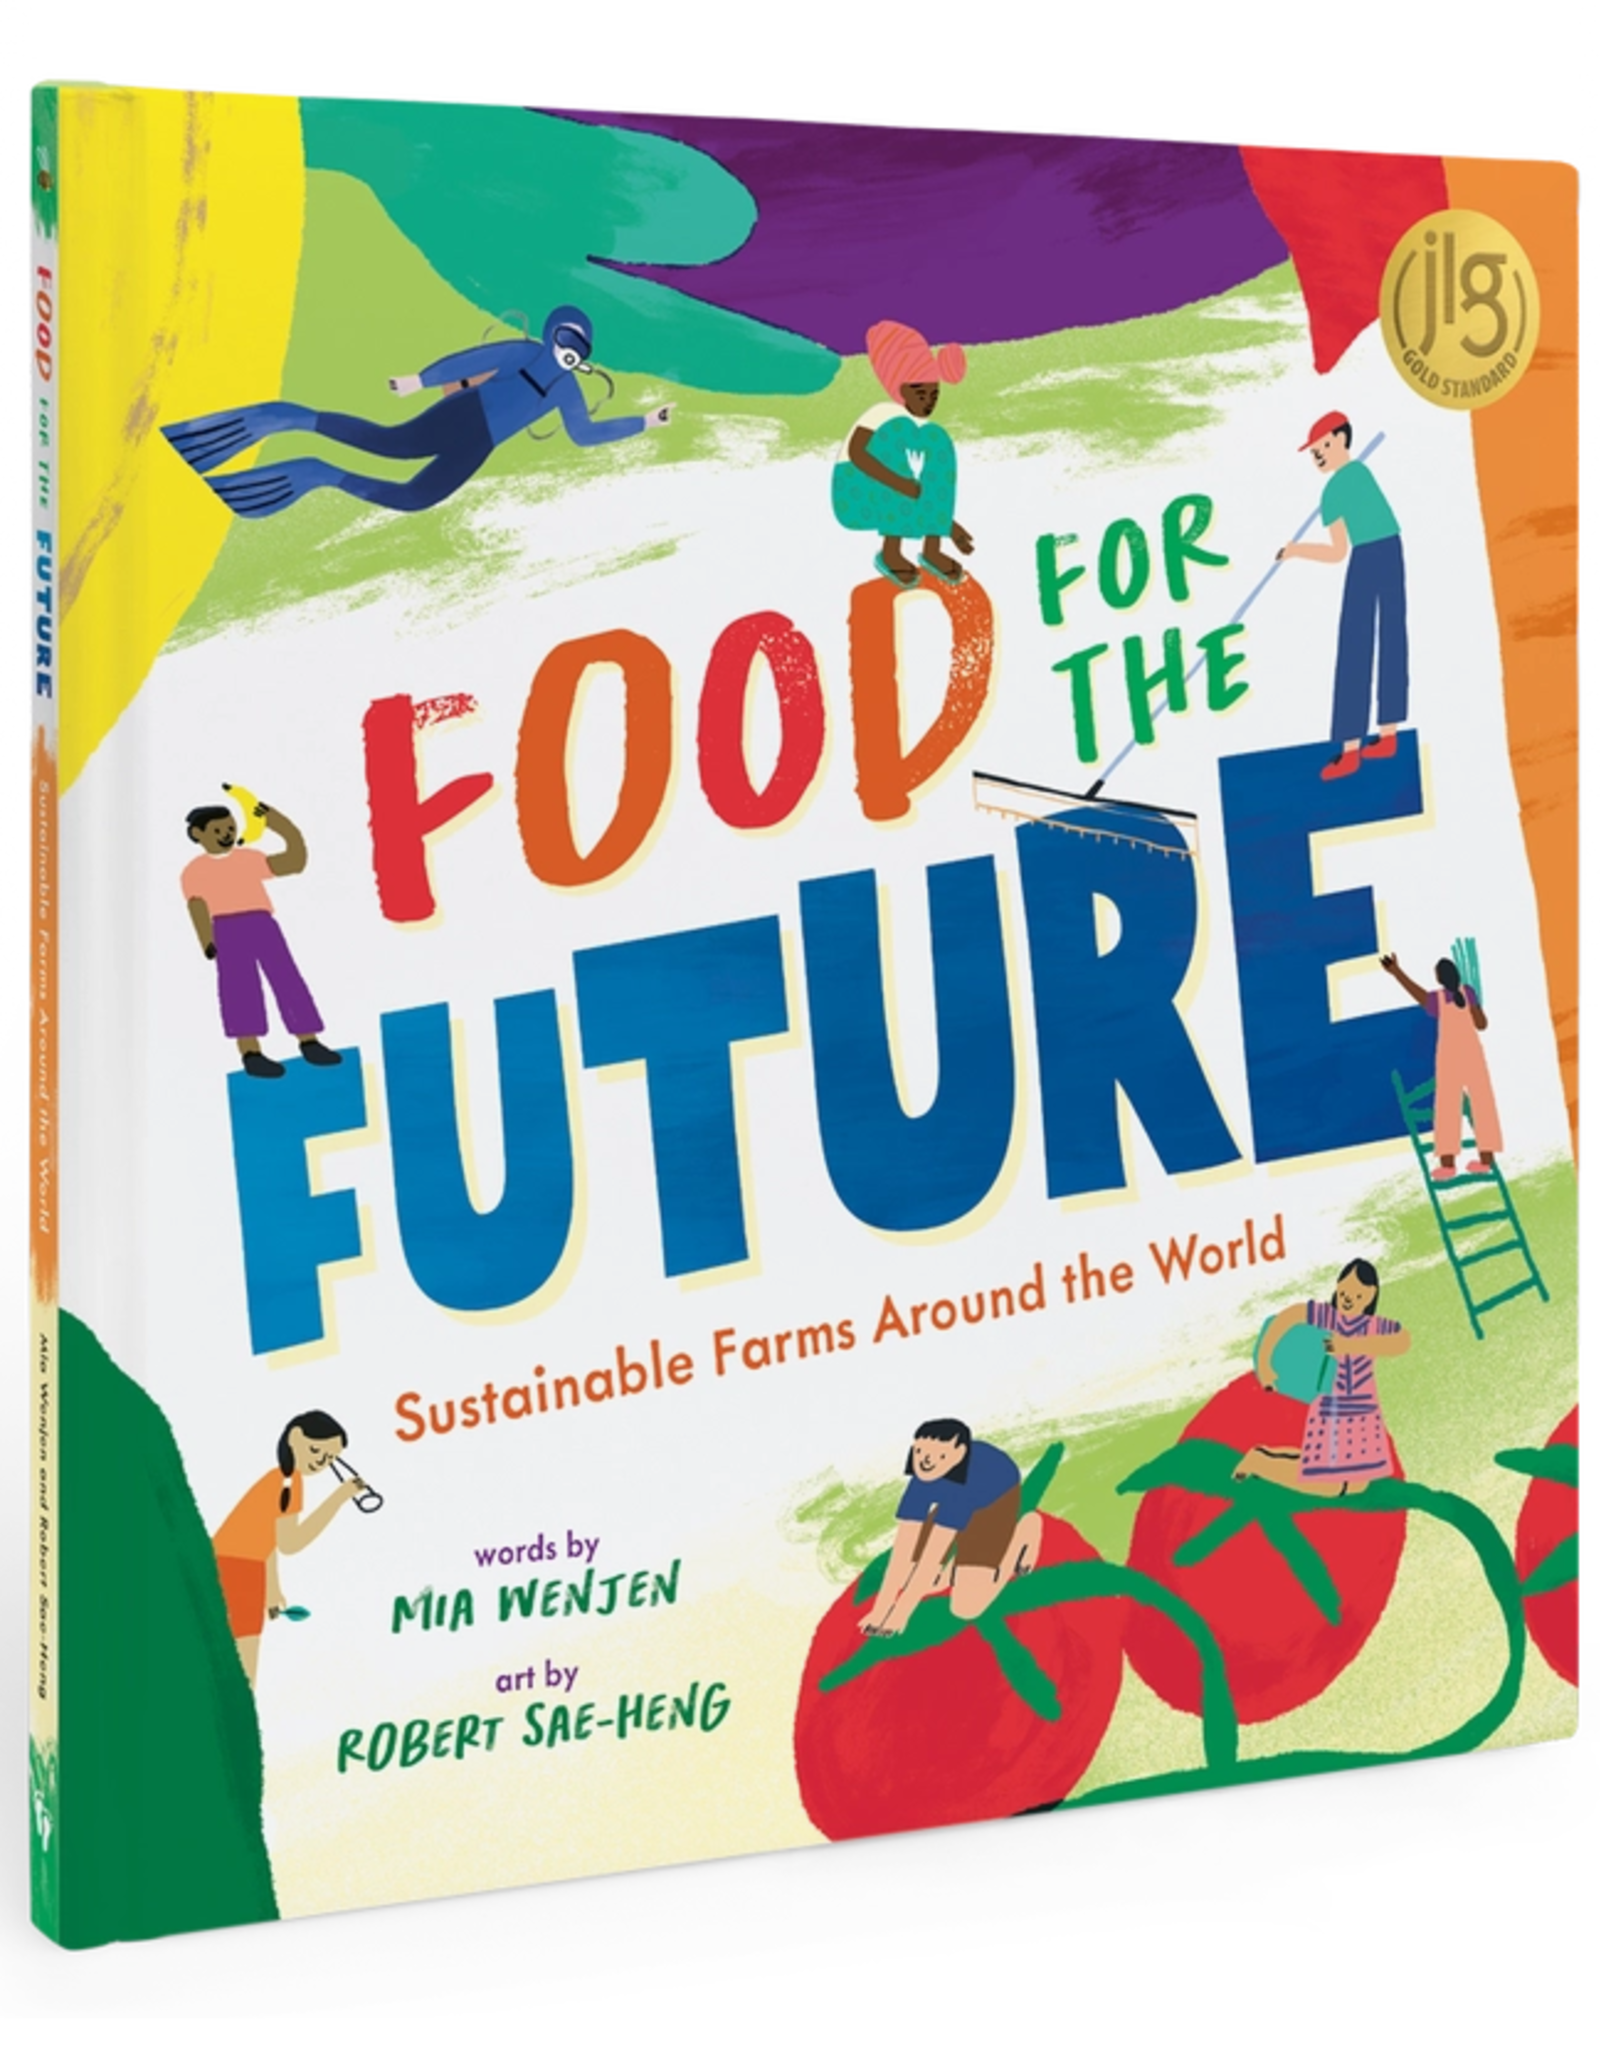 Barefoot Books Food for the Future (Hardcover Book)